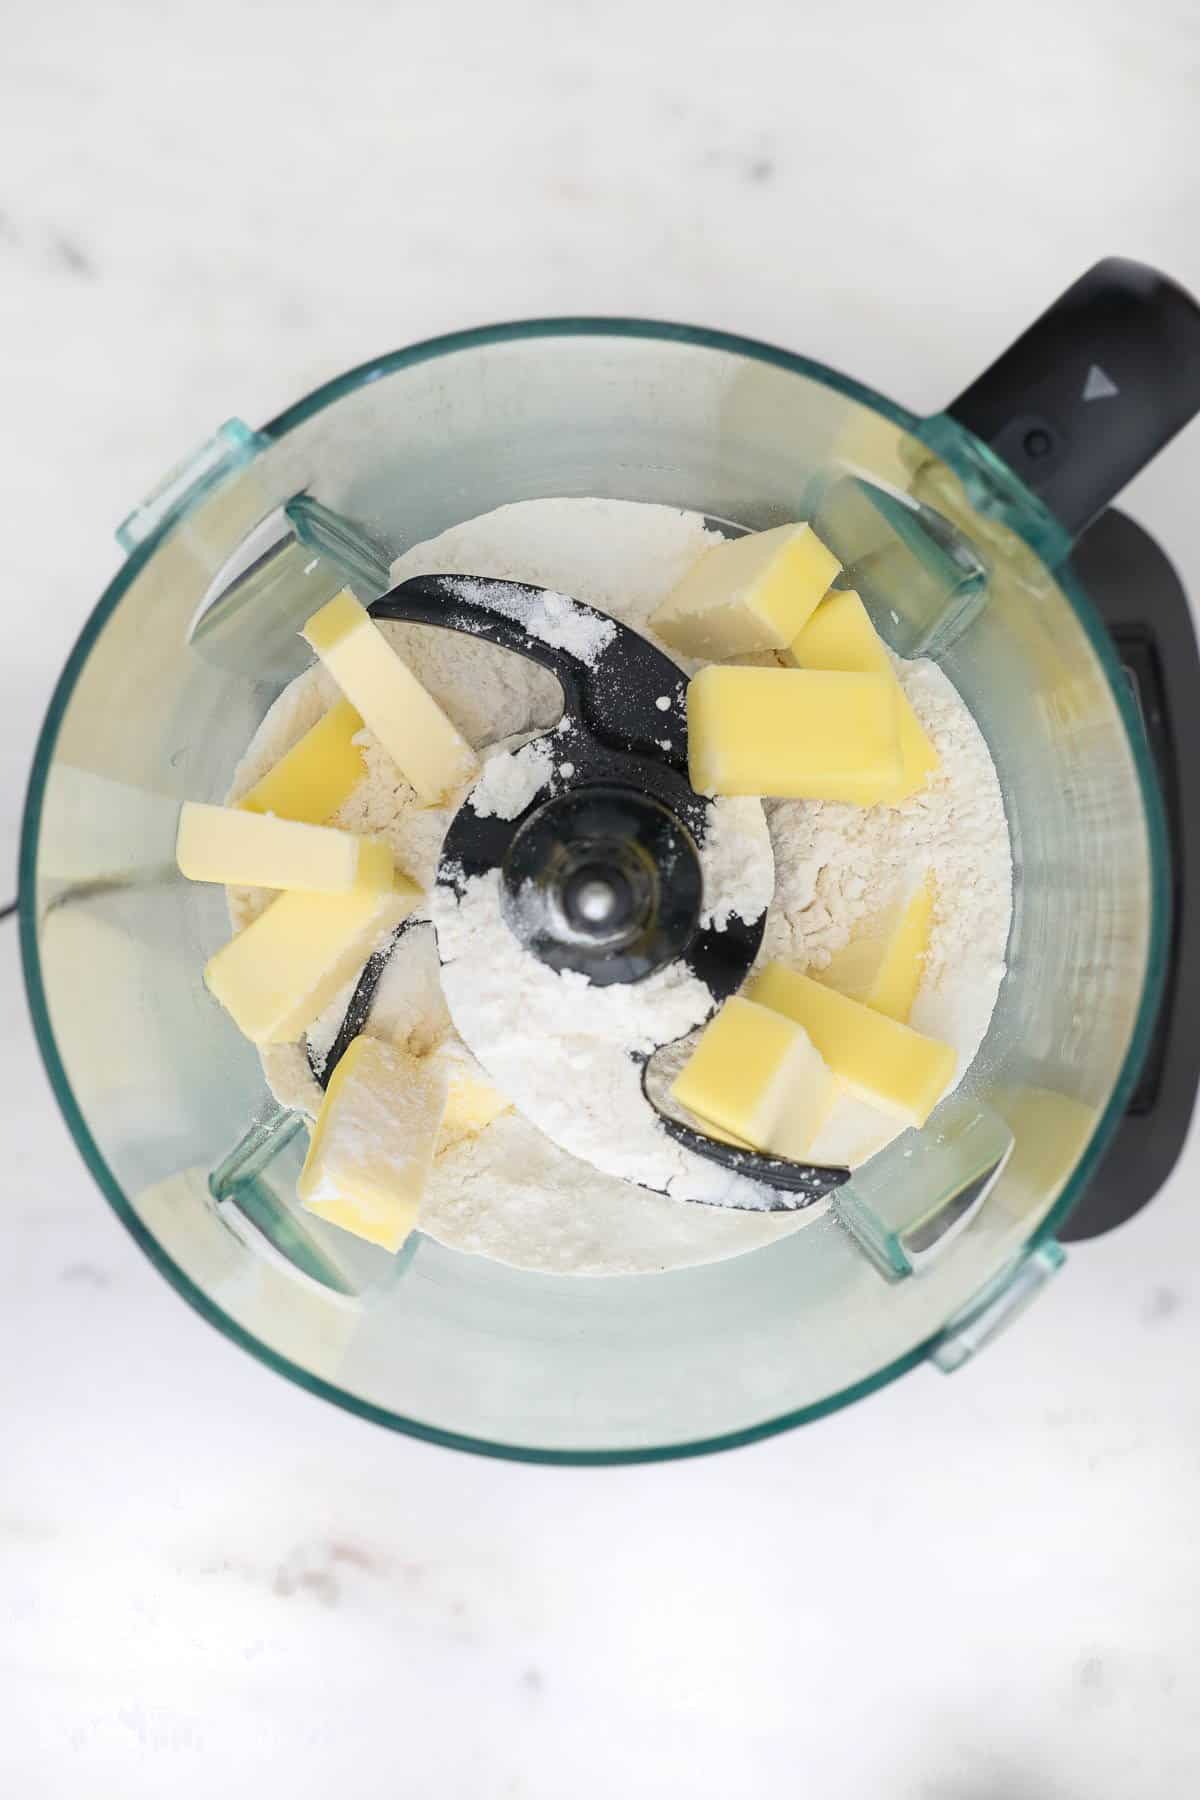 Cold chunks of butter and flour in a food processor